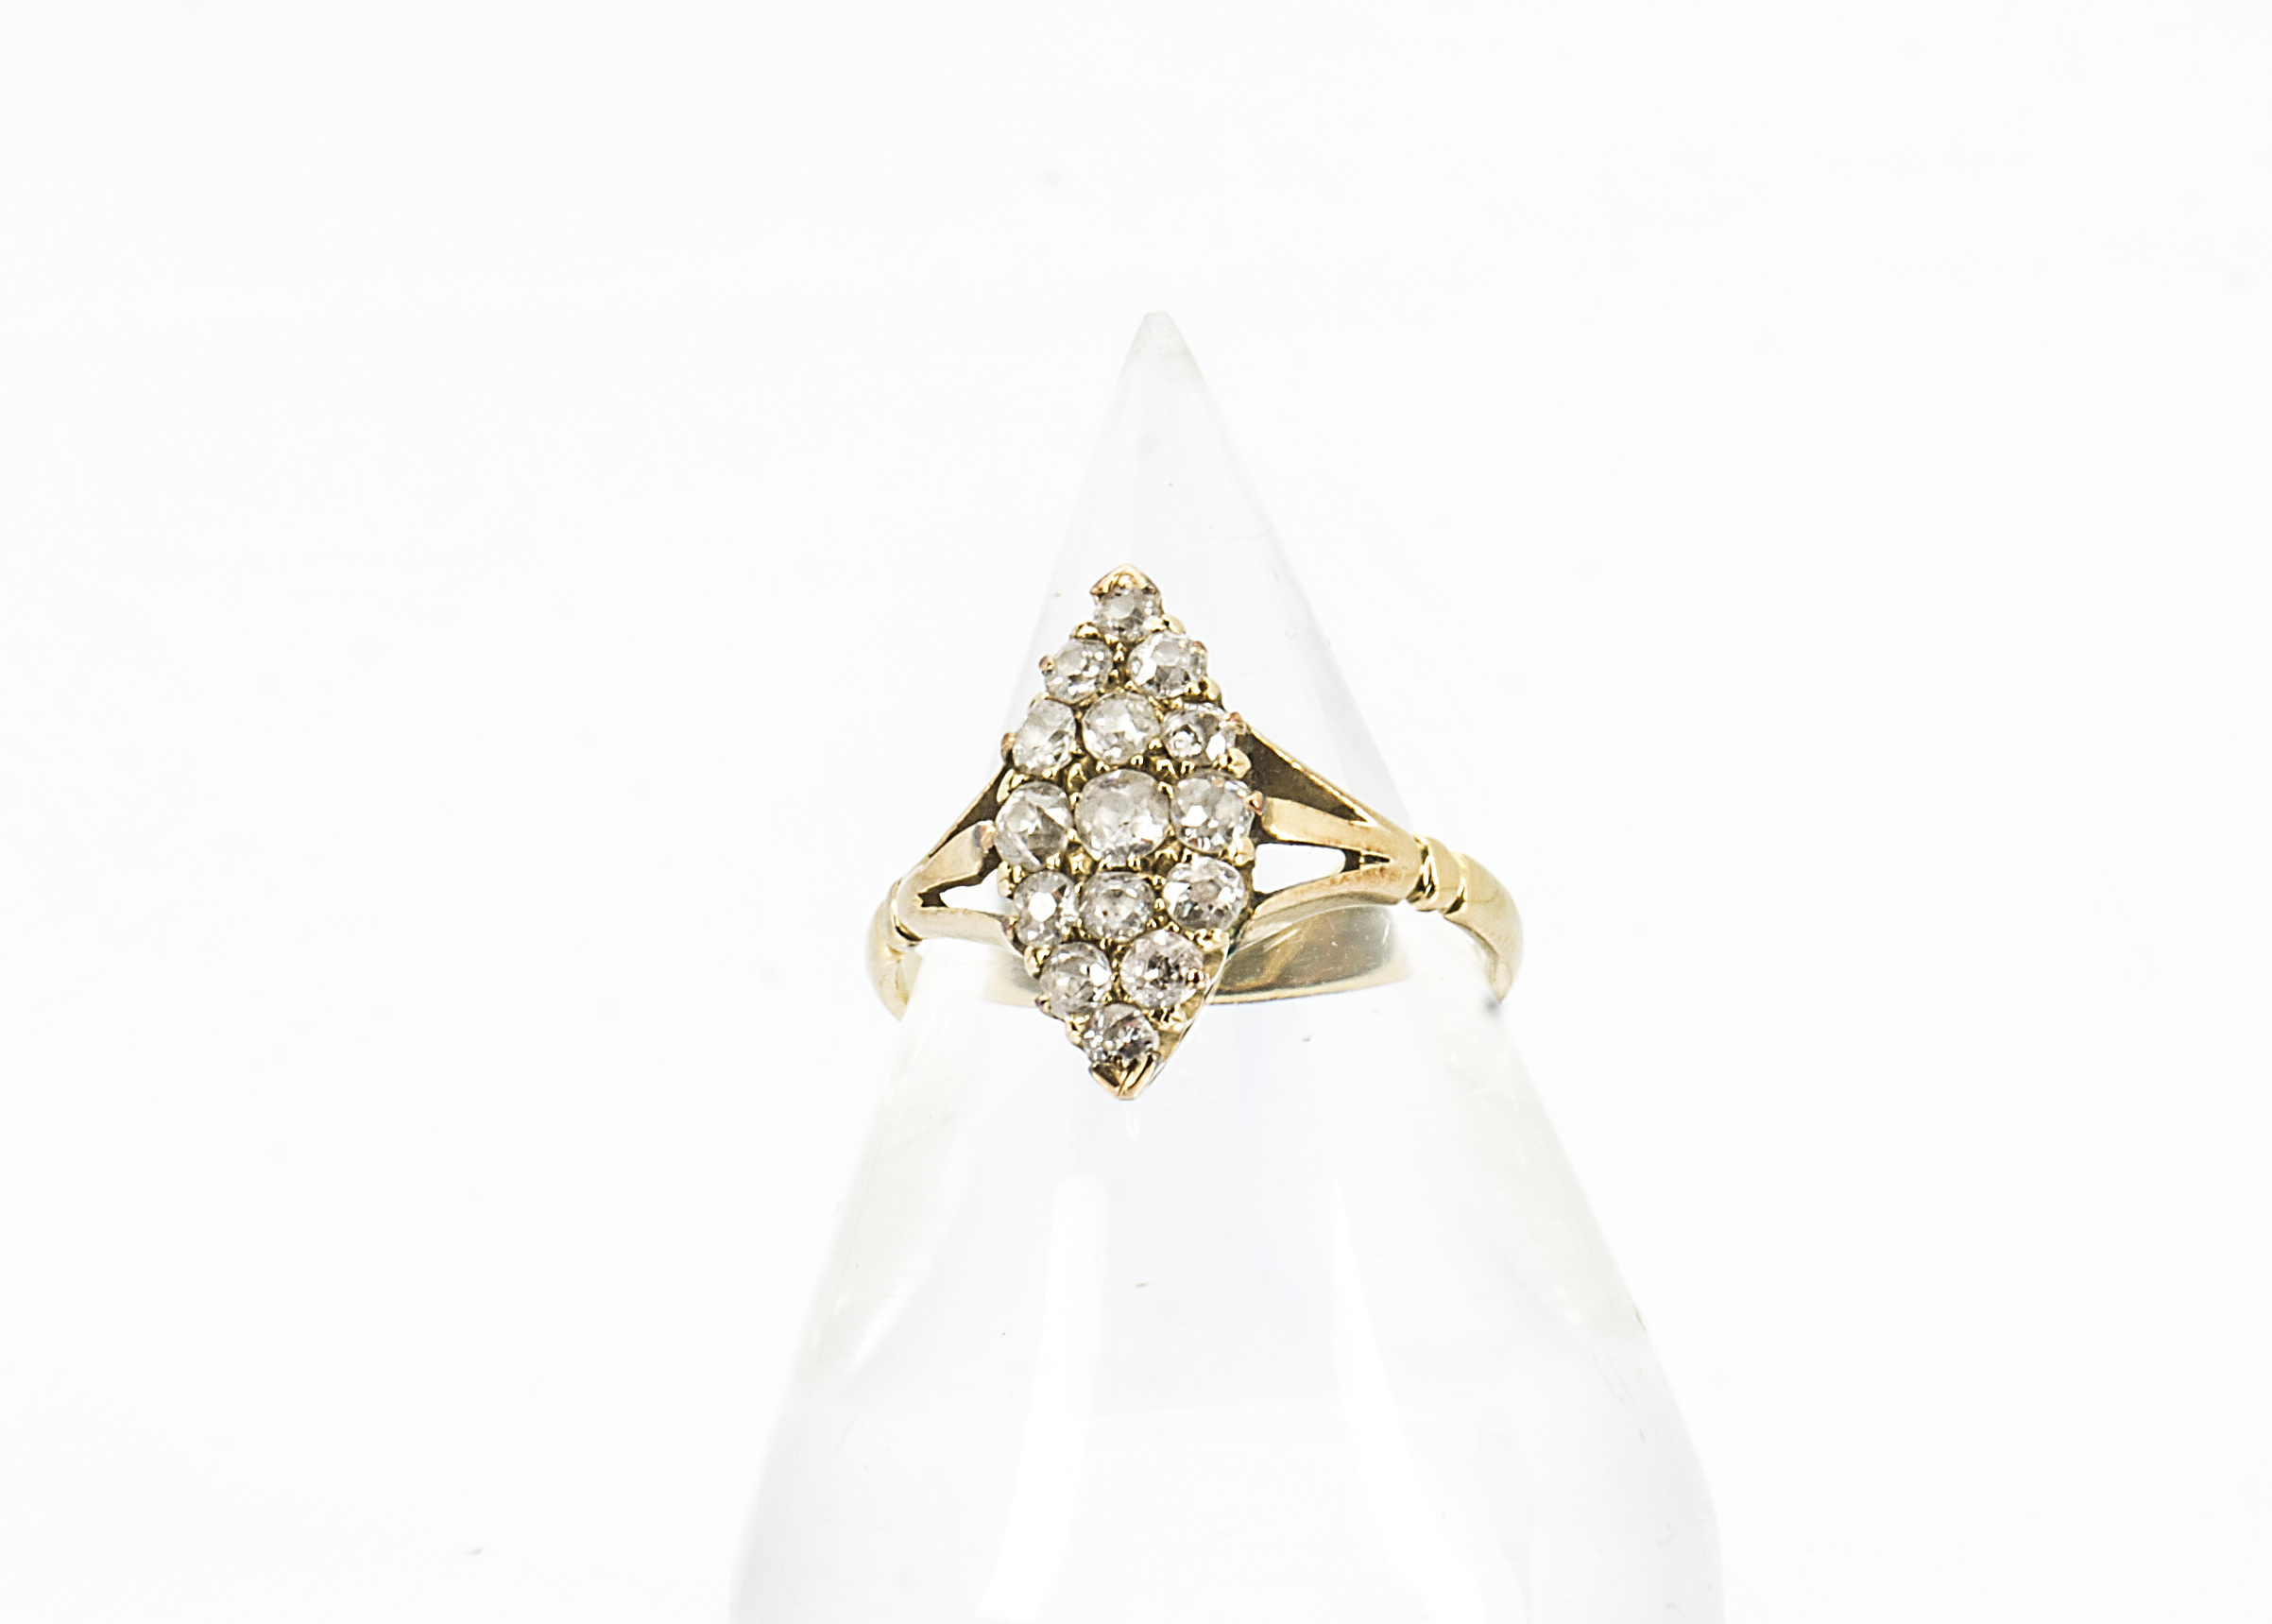 A 19th Century 18ct gold diamond dress ring, the navette shaped setting encrusted with old cut